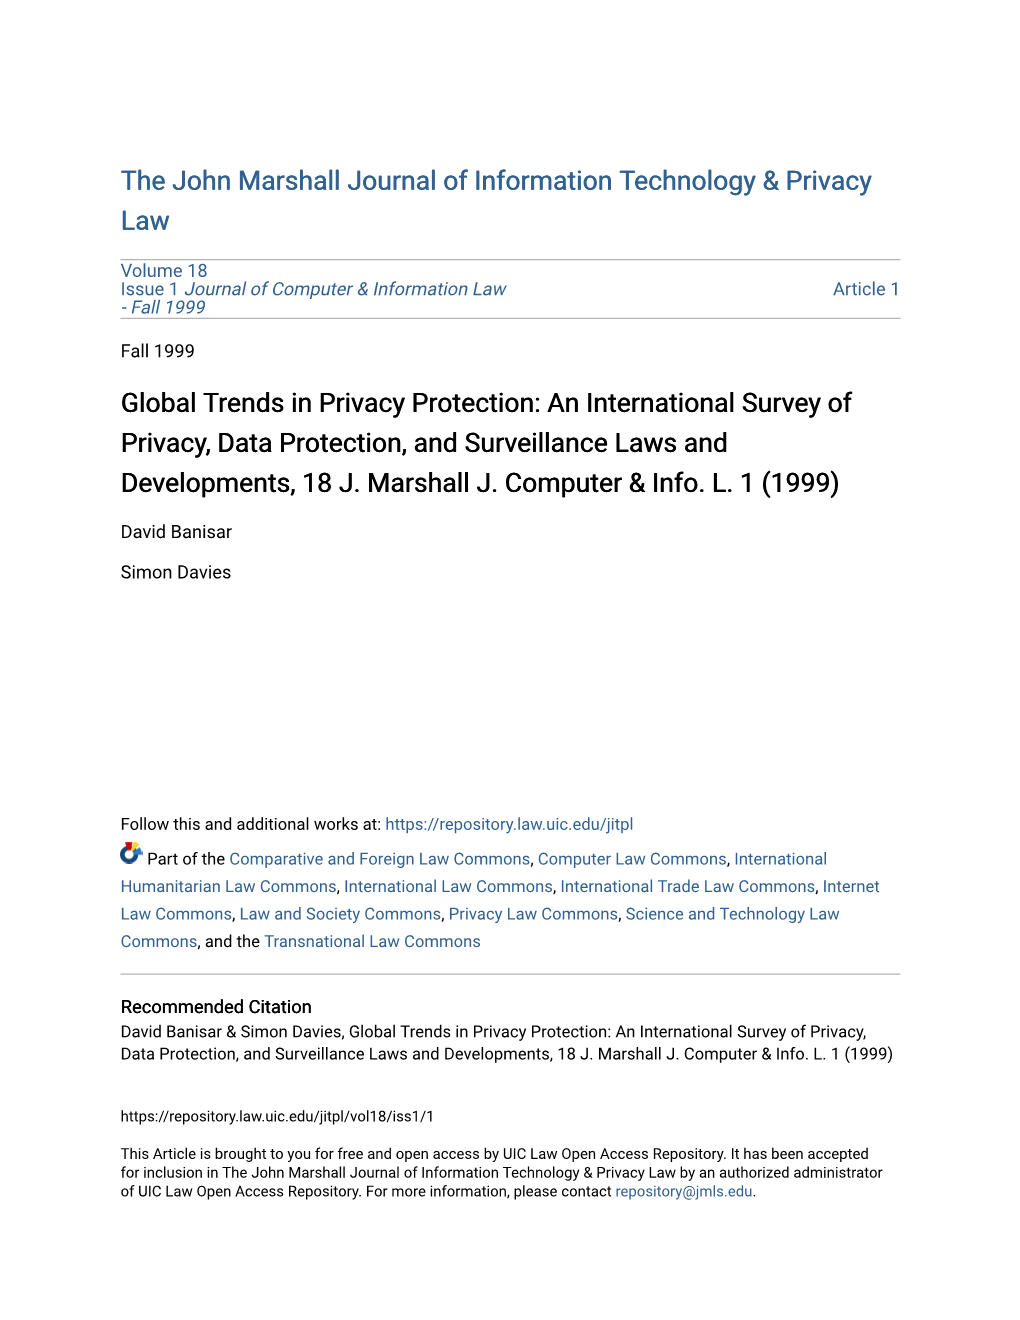 An International Survey of Privacy, Data Protection, and Surveillance Laws and Developments, 18 J